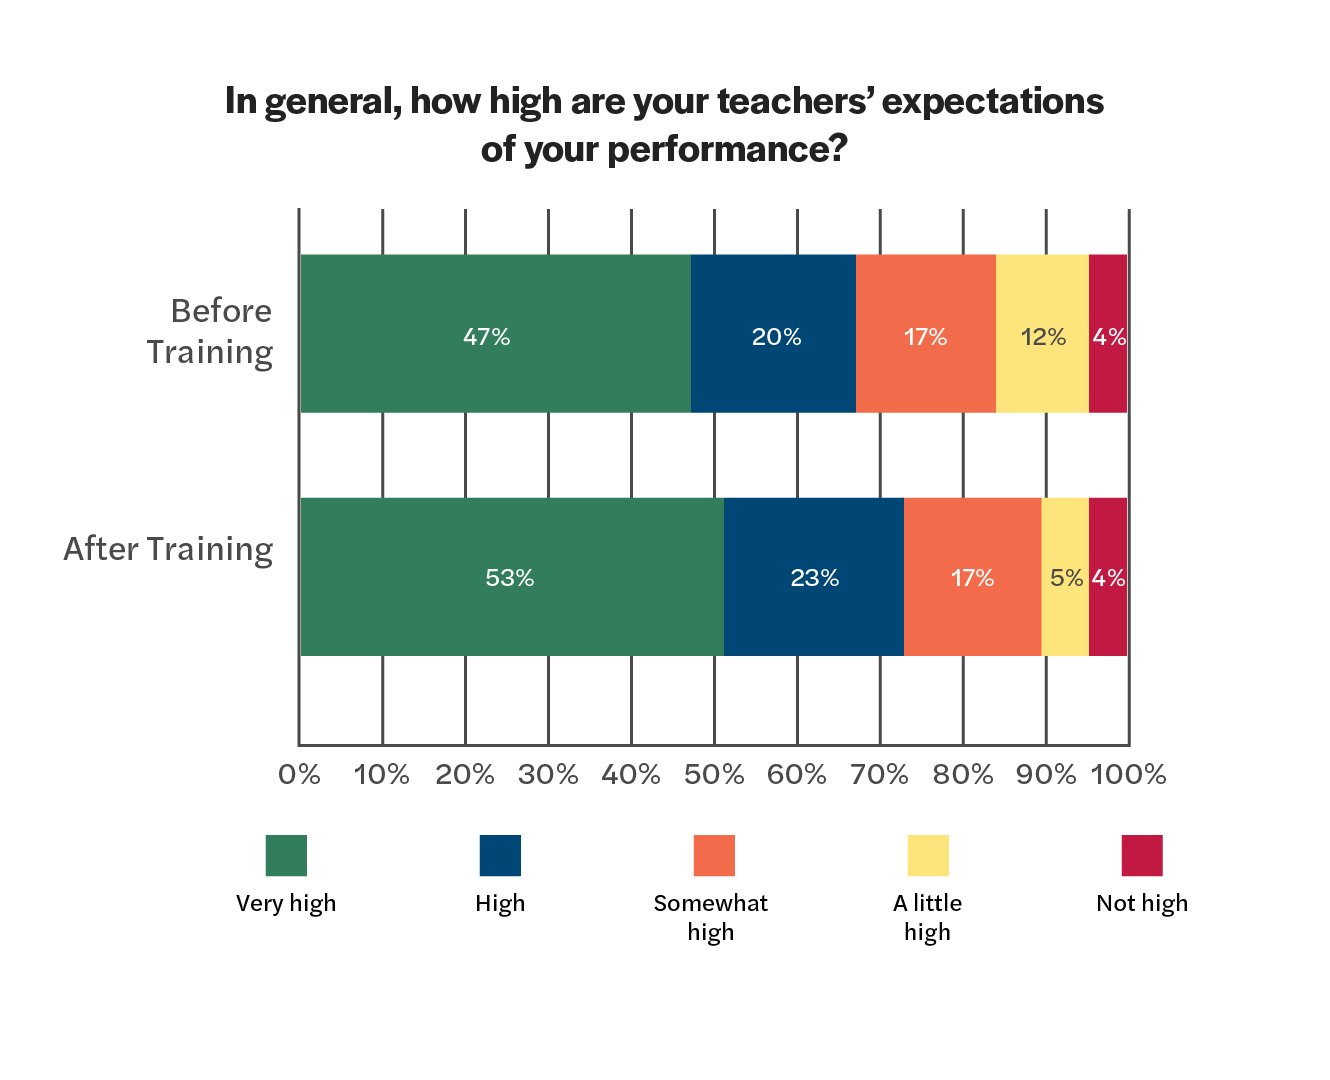 Horizontal bar chart with the title, "In general, how high are your teacher's expectations of your performance" Before training: 47% very high; 20% high; 17% somewhat high; 12% a little high; 4% not high. After training: 53% very high; 23% high; 17% somewhat high; 5% a little high; 4% not high.